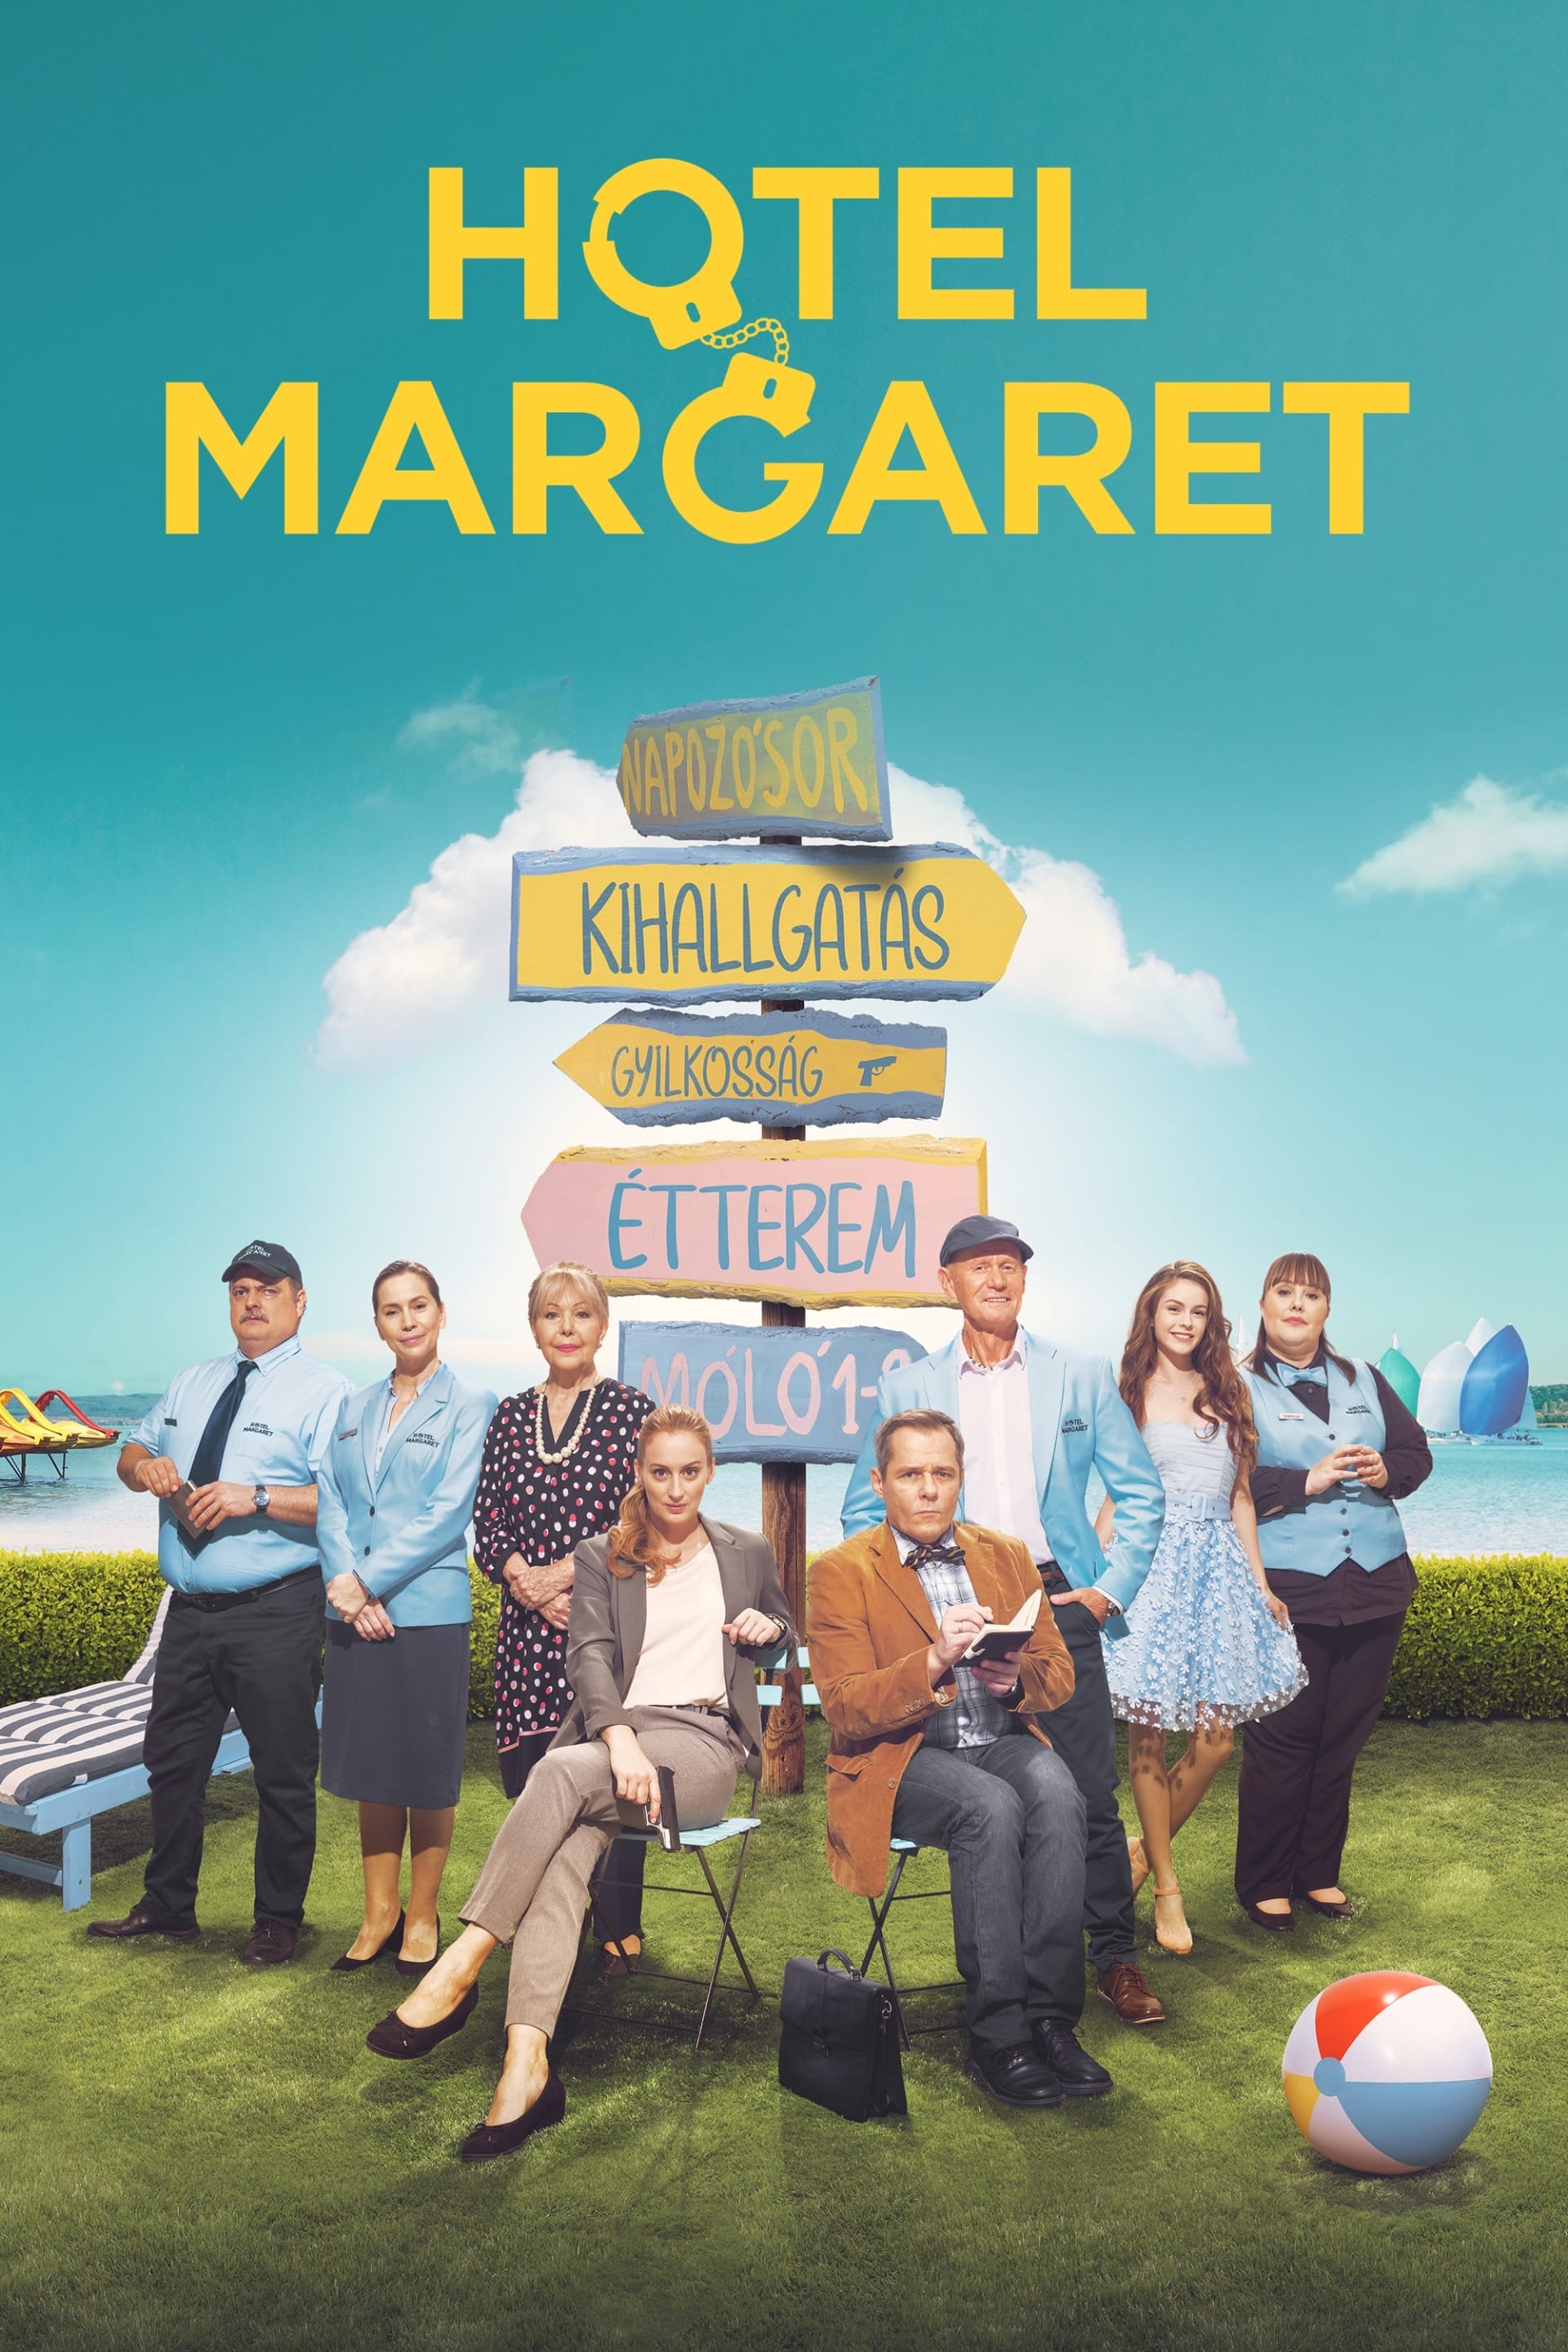 Hotel Margaret TV Shows About Police